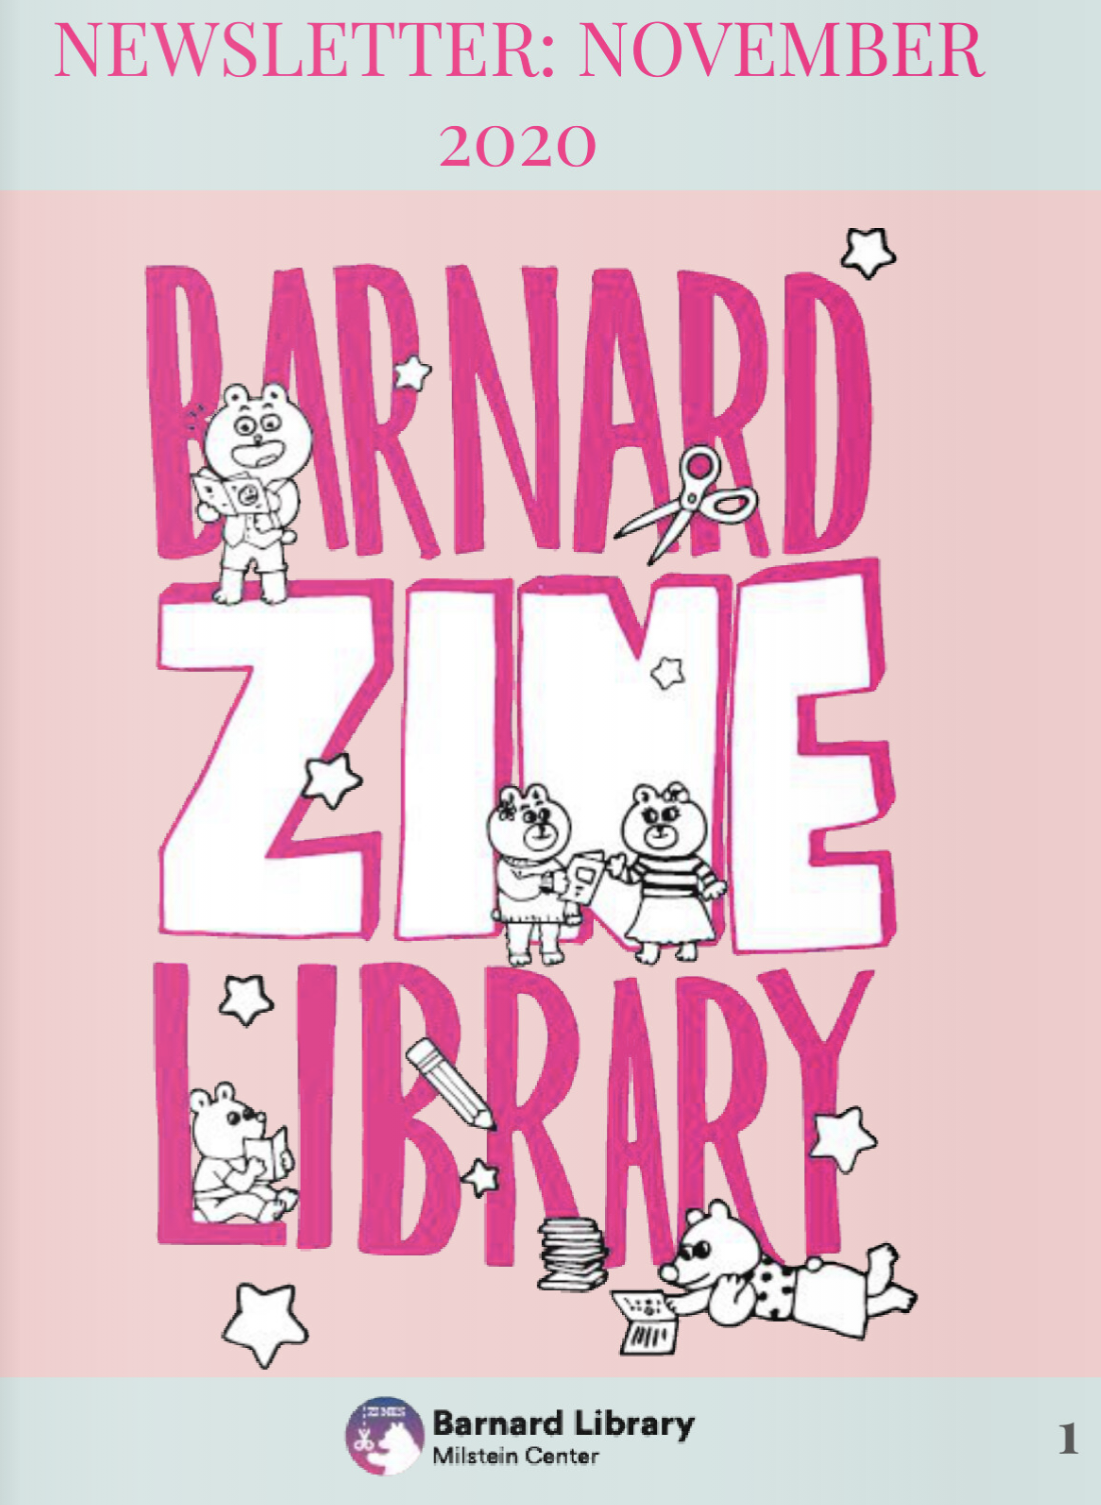 A pink cover with bold lettering for the Barnard Zine Library Newsletter